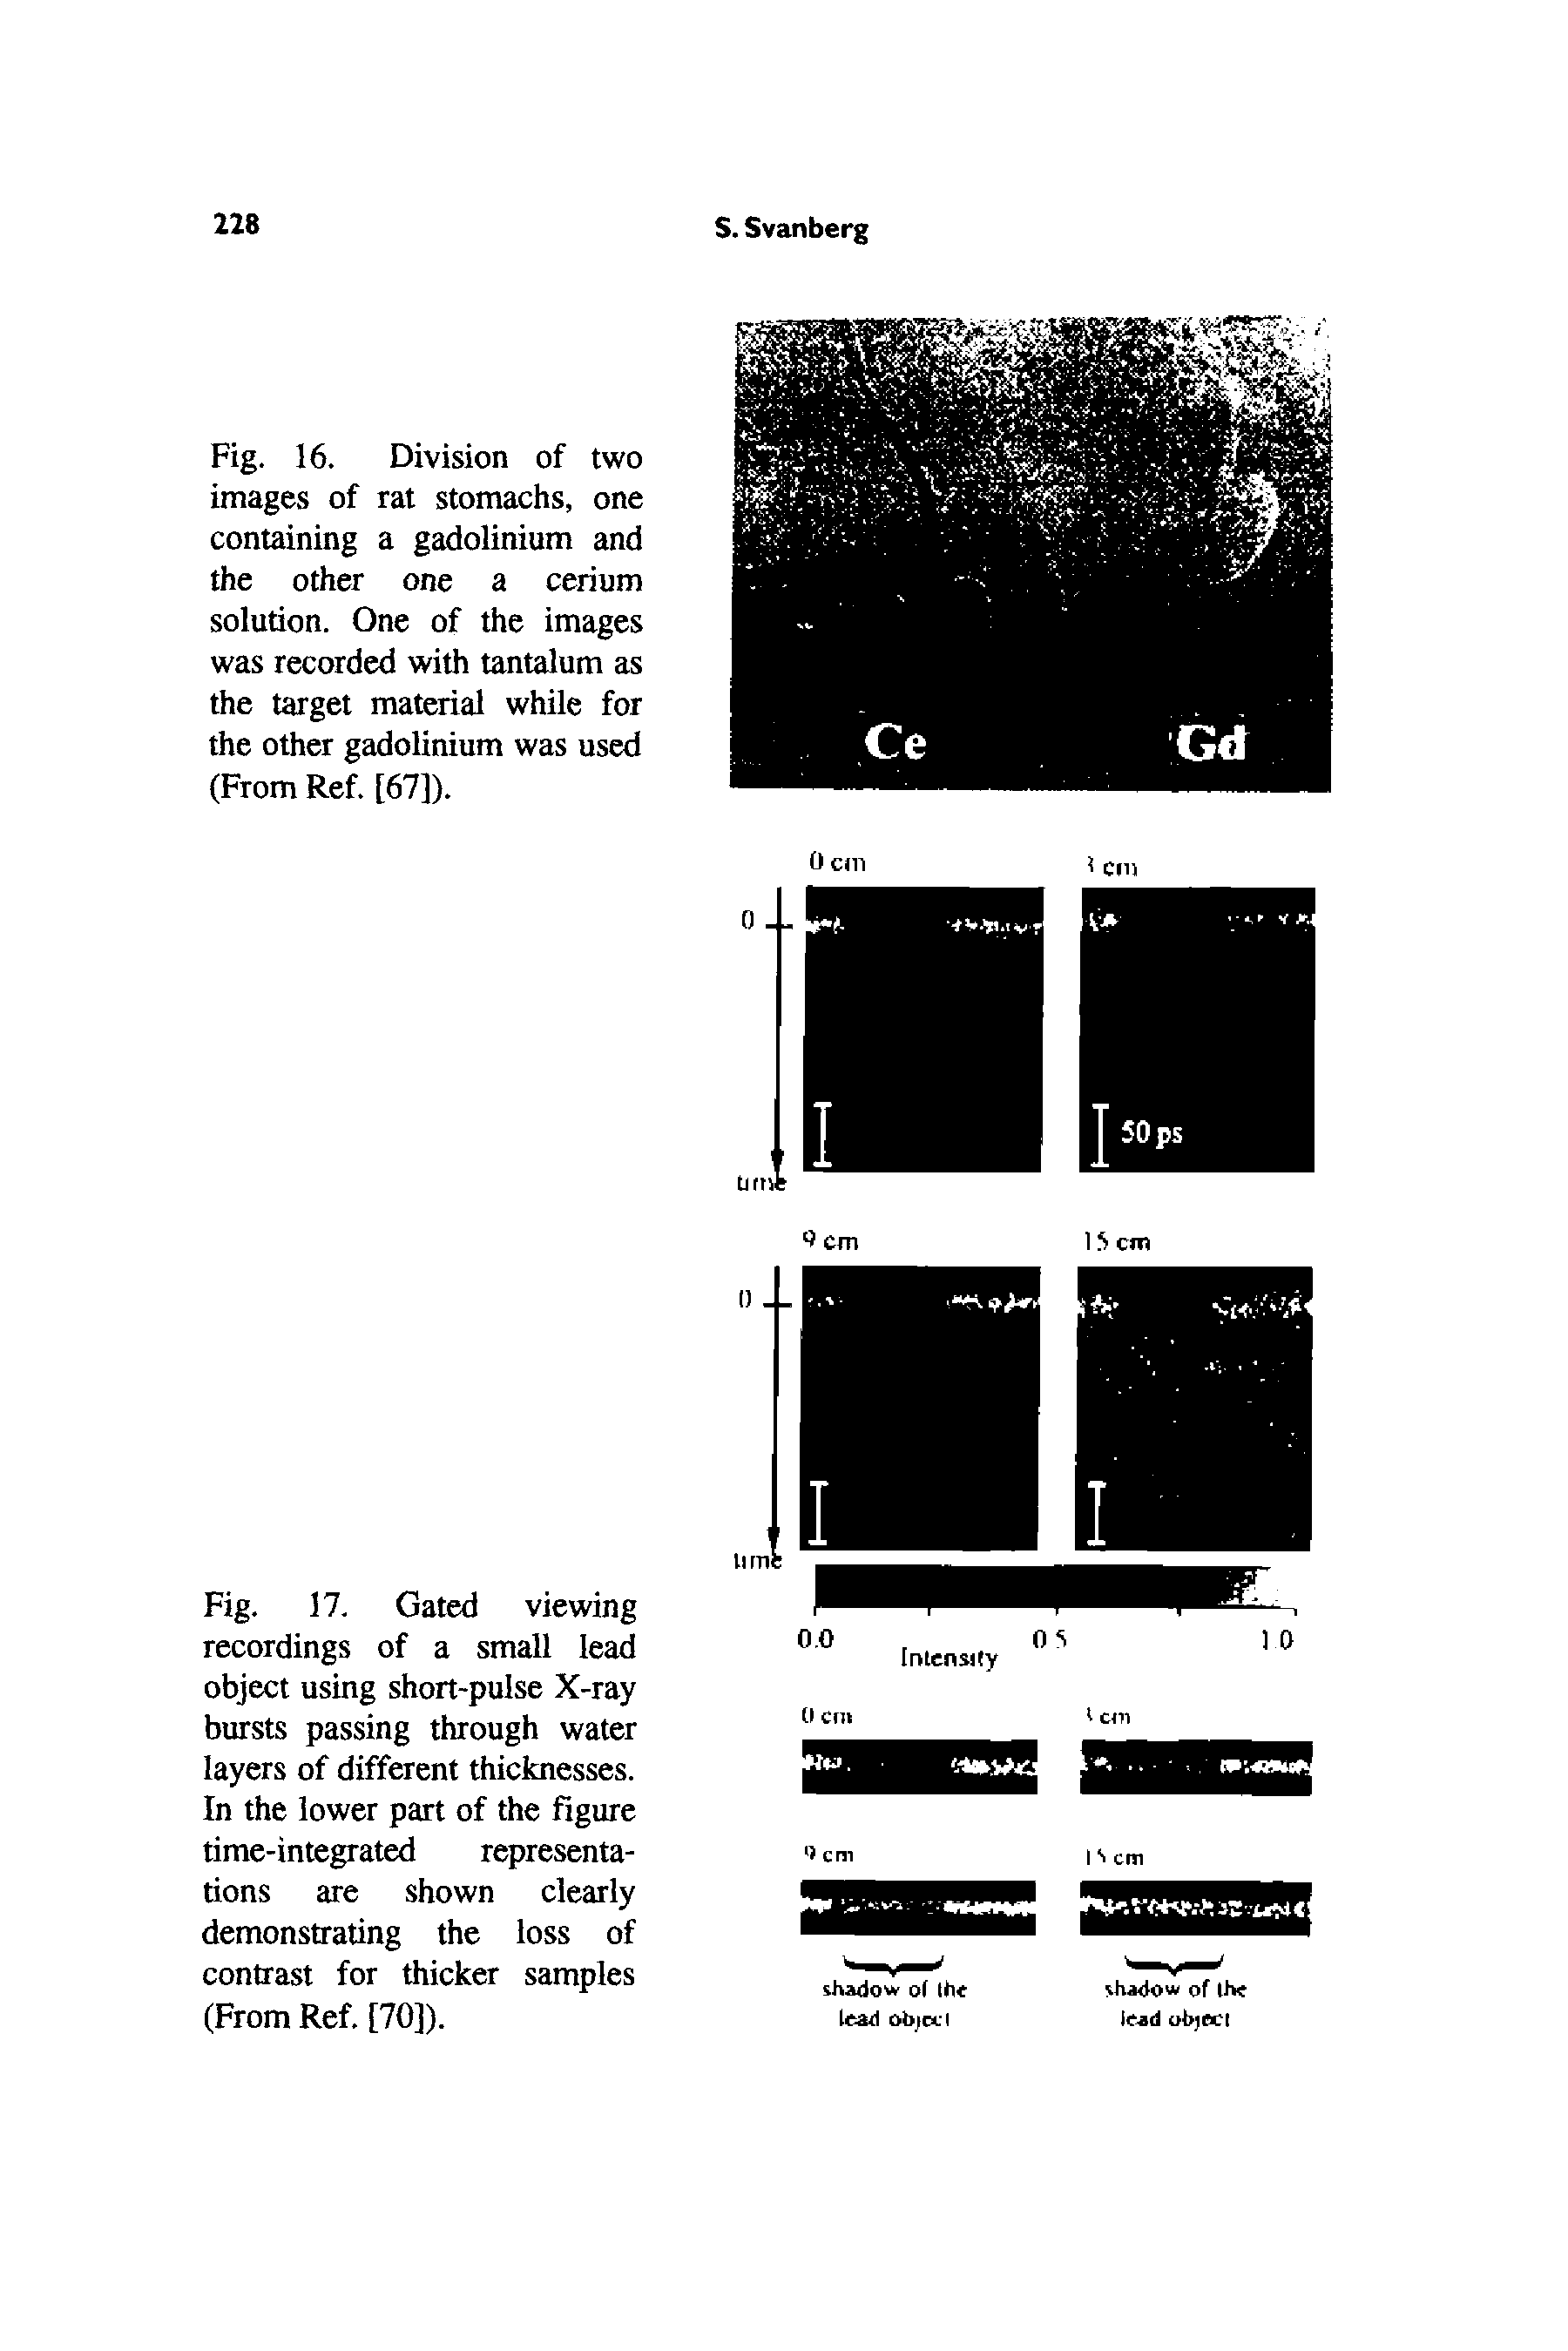 Fig. 17. Gated viewing recordings of a small lead object using short-pulse X-ray bursts passing through water layers of different thicknesses. In the lower part of the figure time-integrated representations are shown clearly demonstrating the loss of contrast for thicker samples (From Ref. [70]).